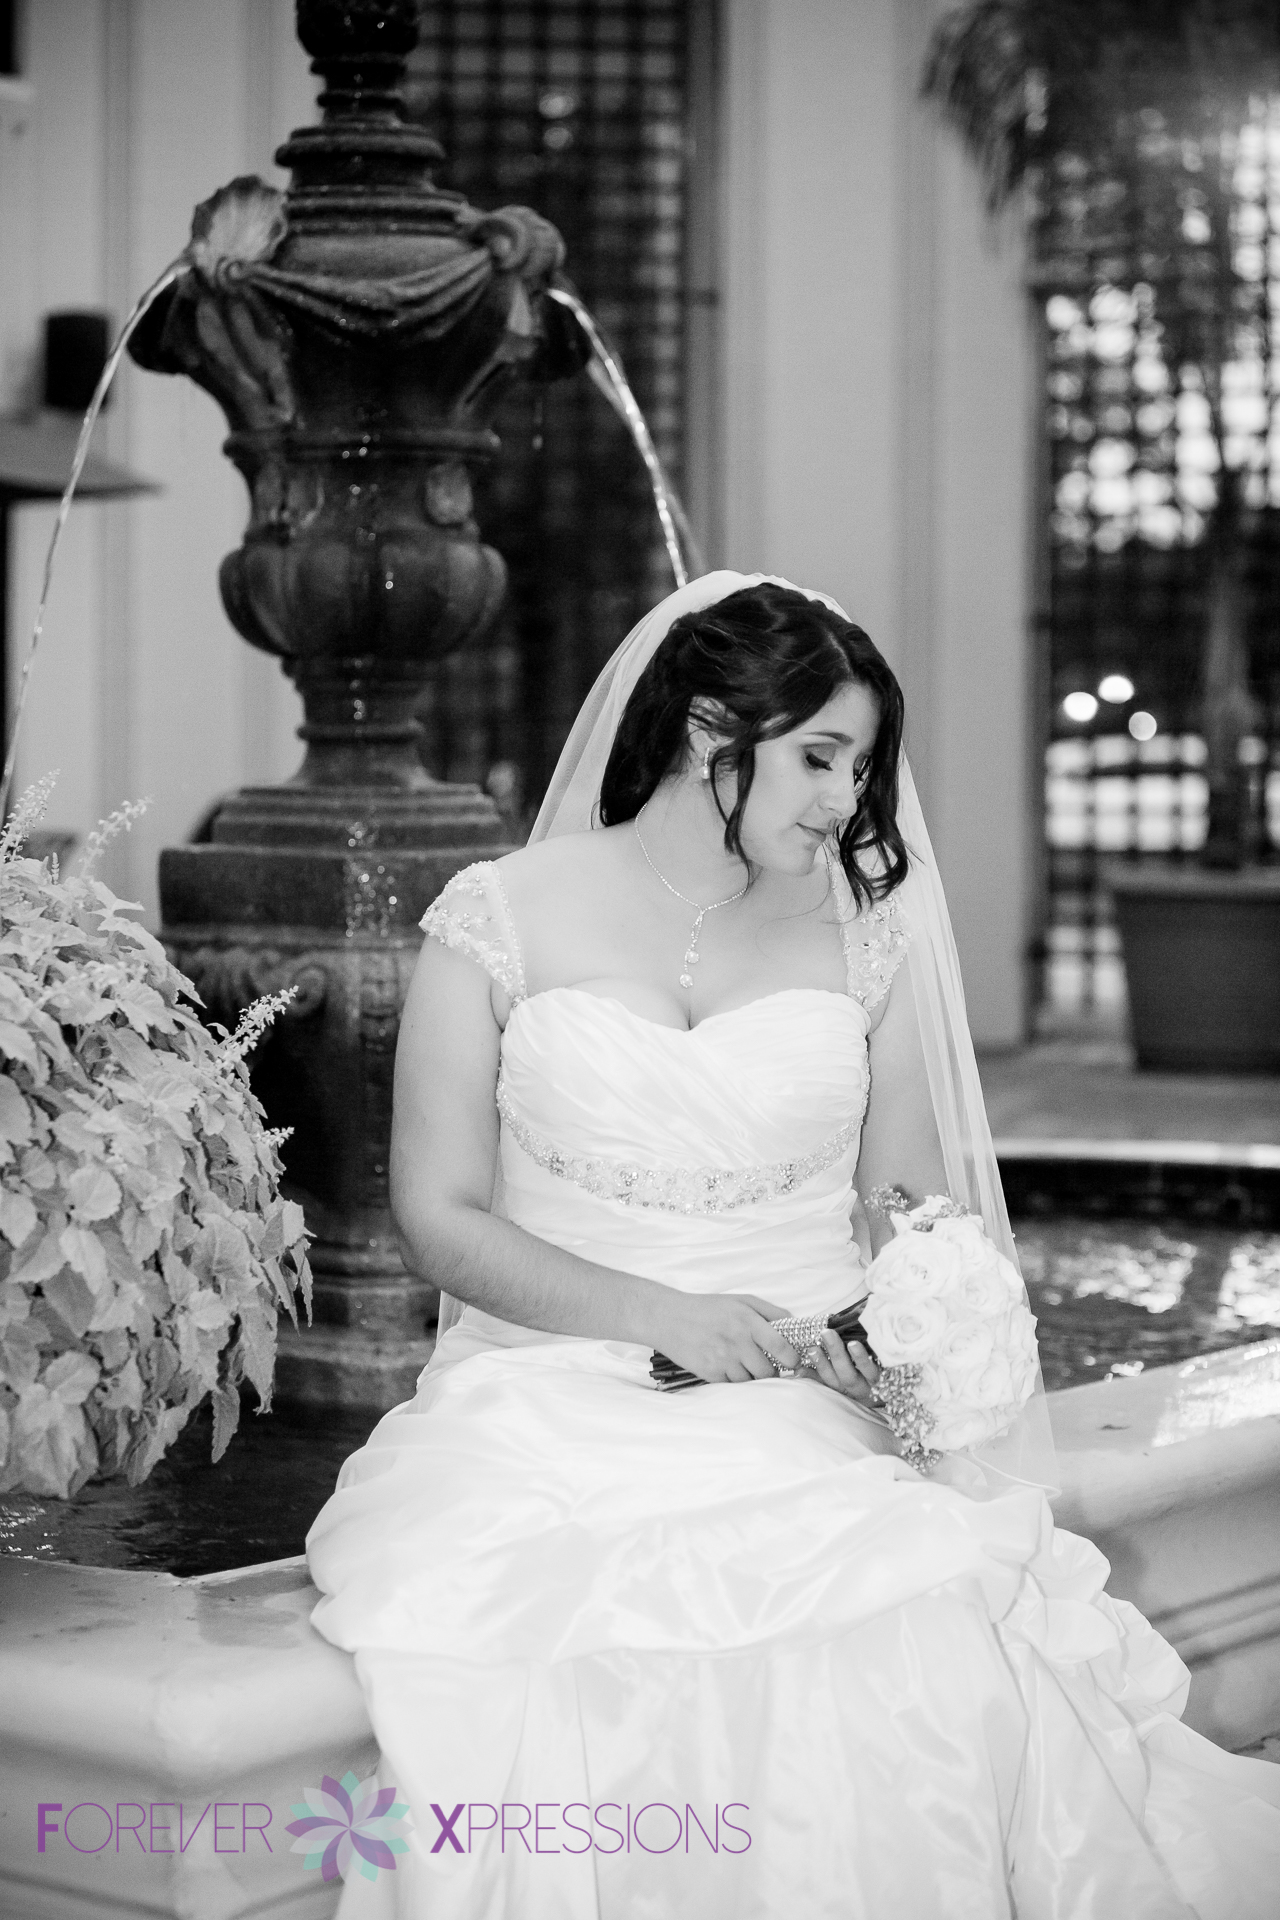 Forever_Xpressions_Wedding_Photography_Monteverde_Bella_Collina-0535